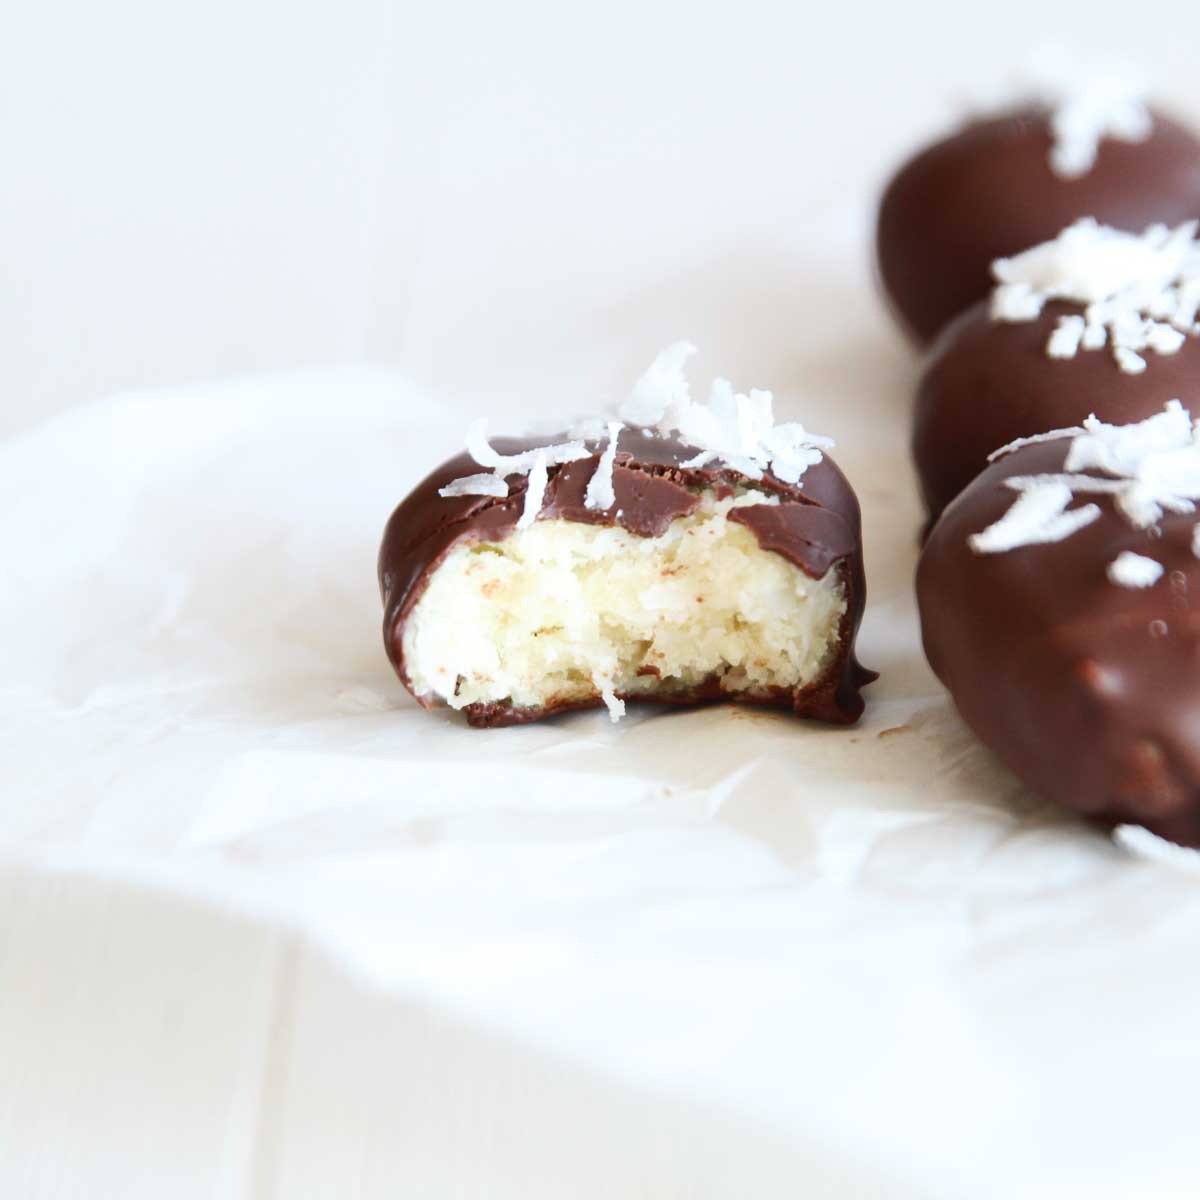 Chocolate Coconut Easter Eggs Made with Collagen Protein Powder - Chocolate Coconut Easter Eggs